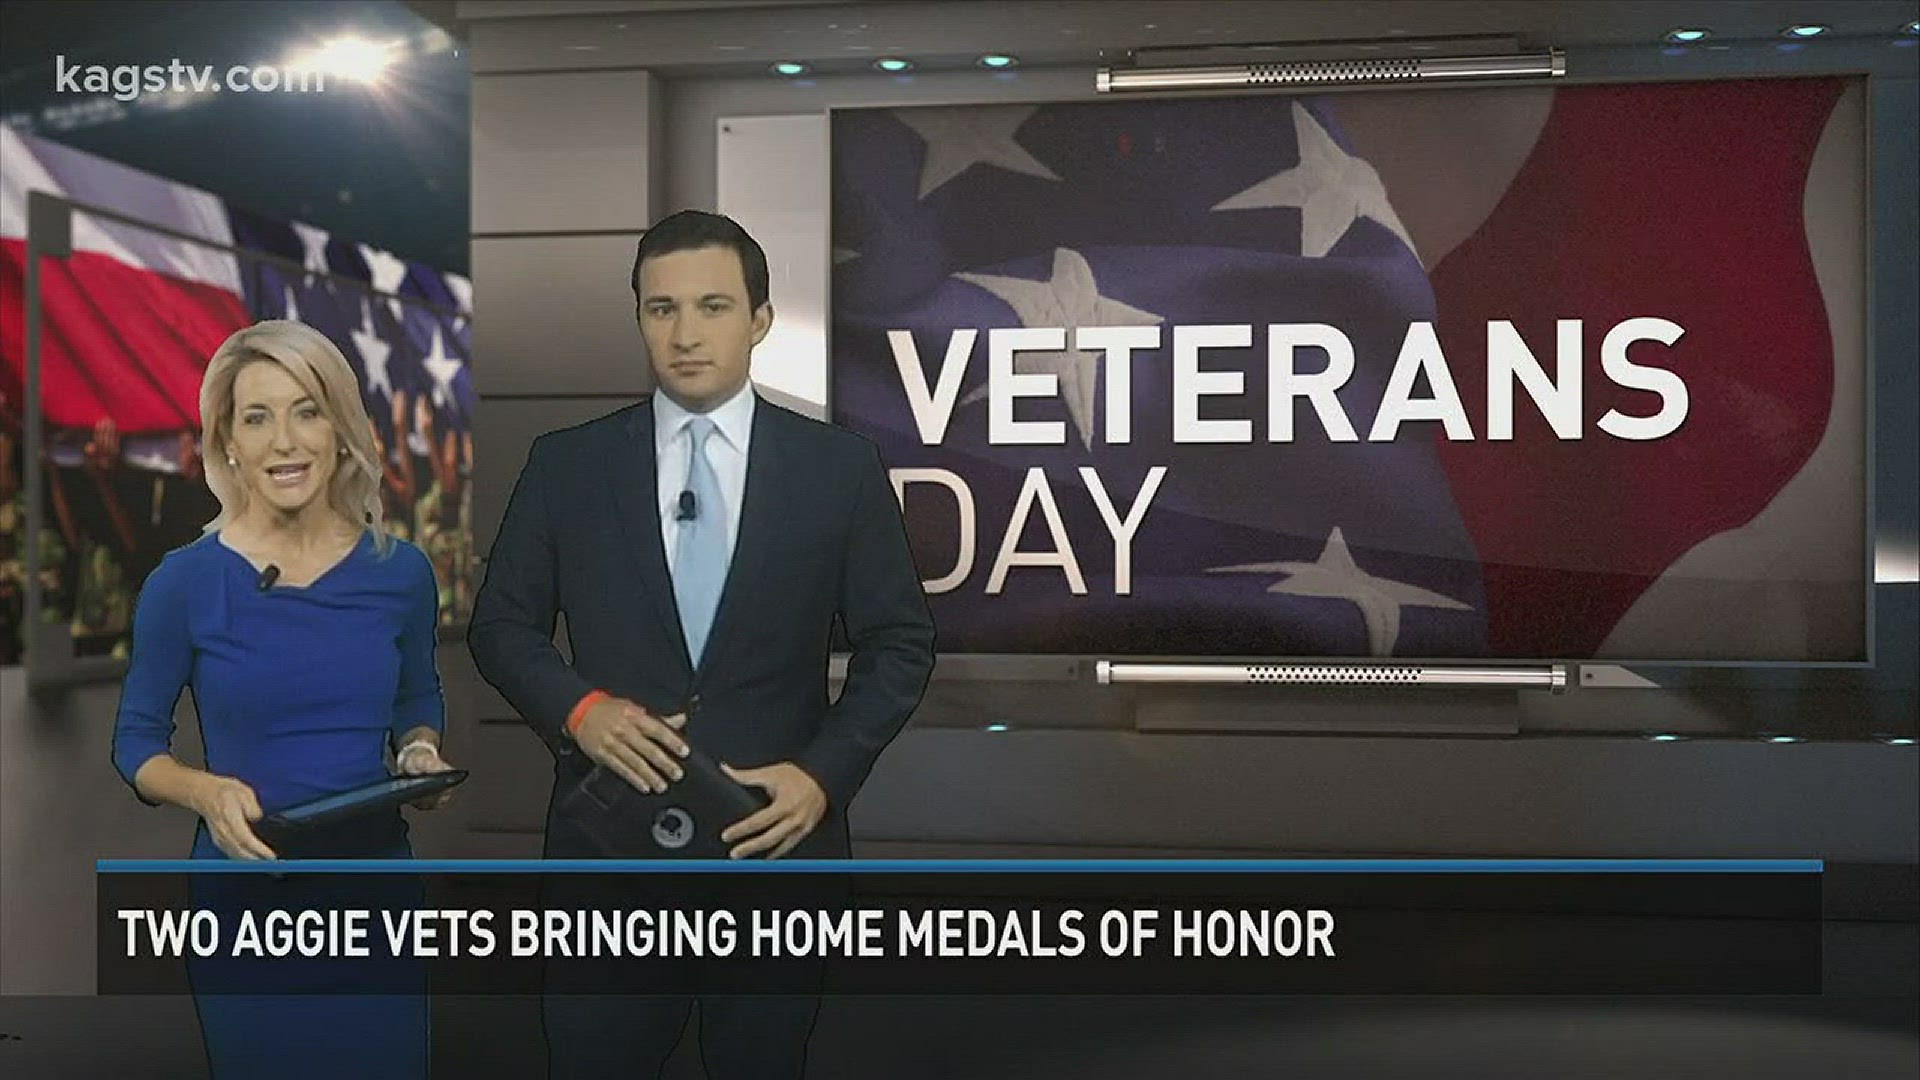 With Veterans Day tomorrow and it being observed today KAGS Jay O'Brien spoke with some local Aggie veterans about their work to bring Medal Of Honor awards home to Aggieland.